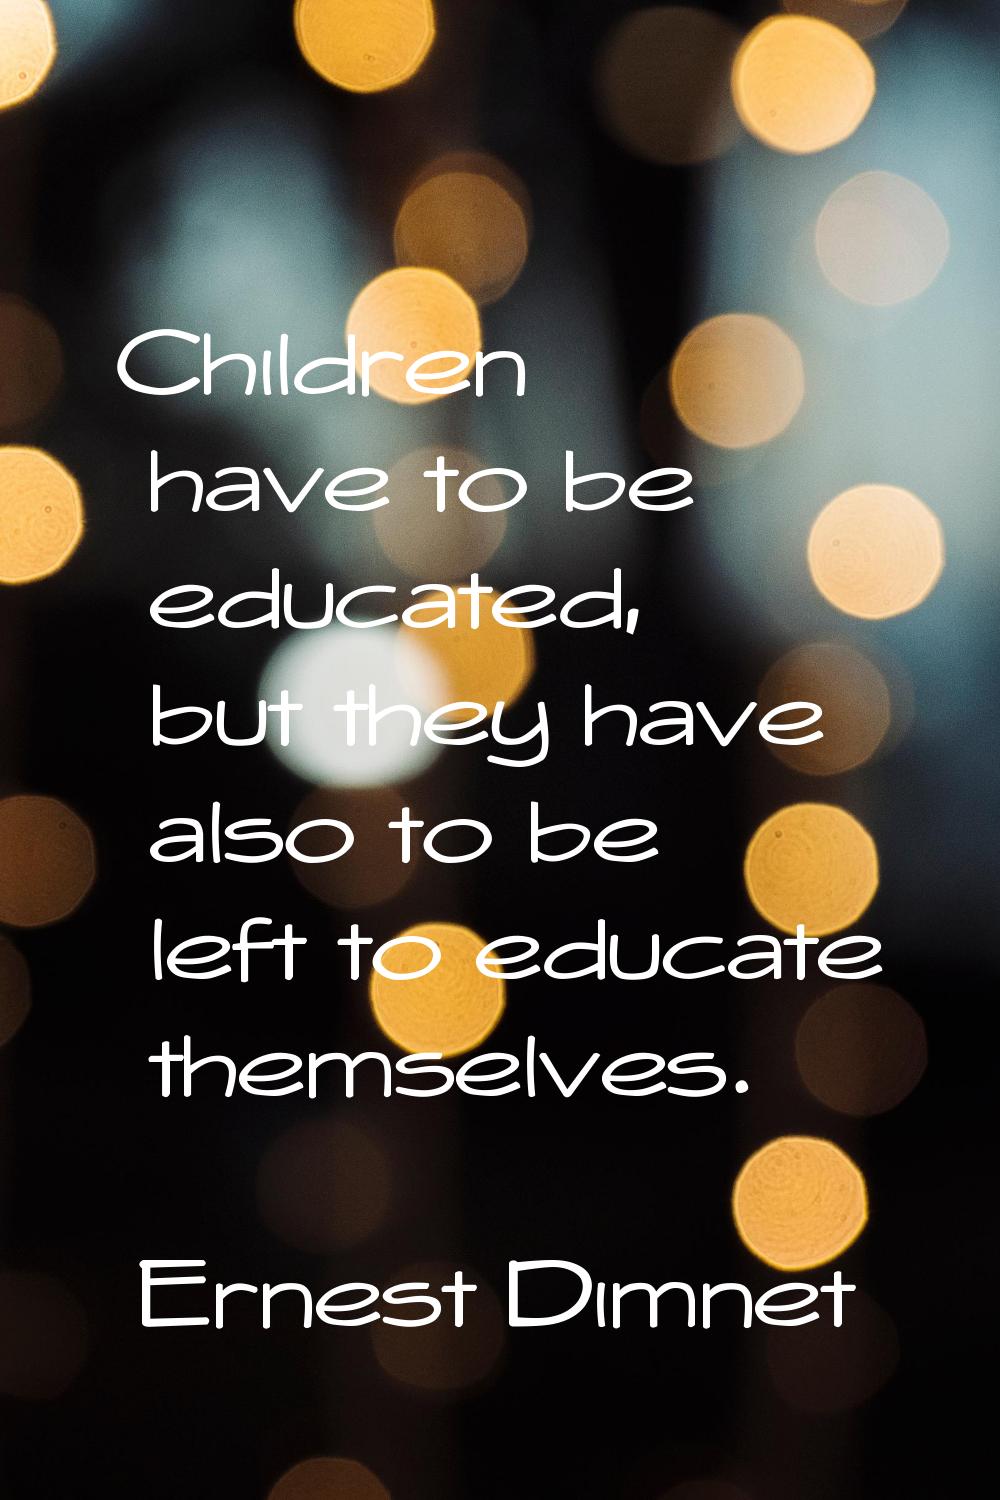 Children have to be educated, but they have also to be left to educate themselves.